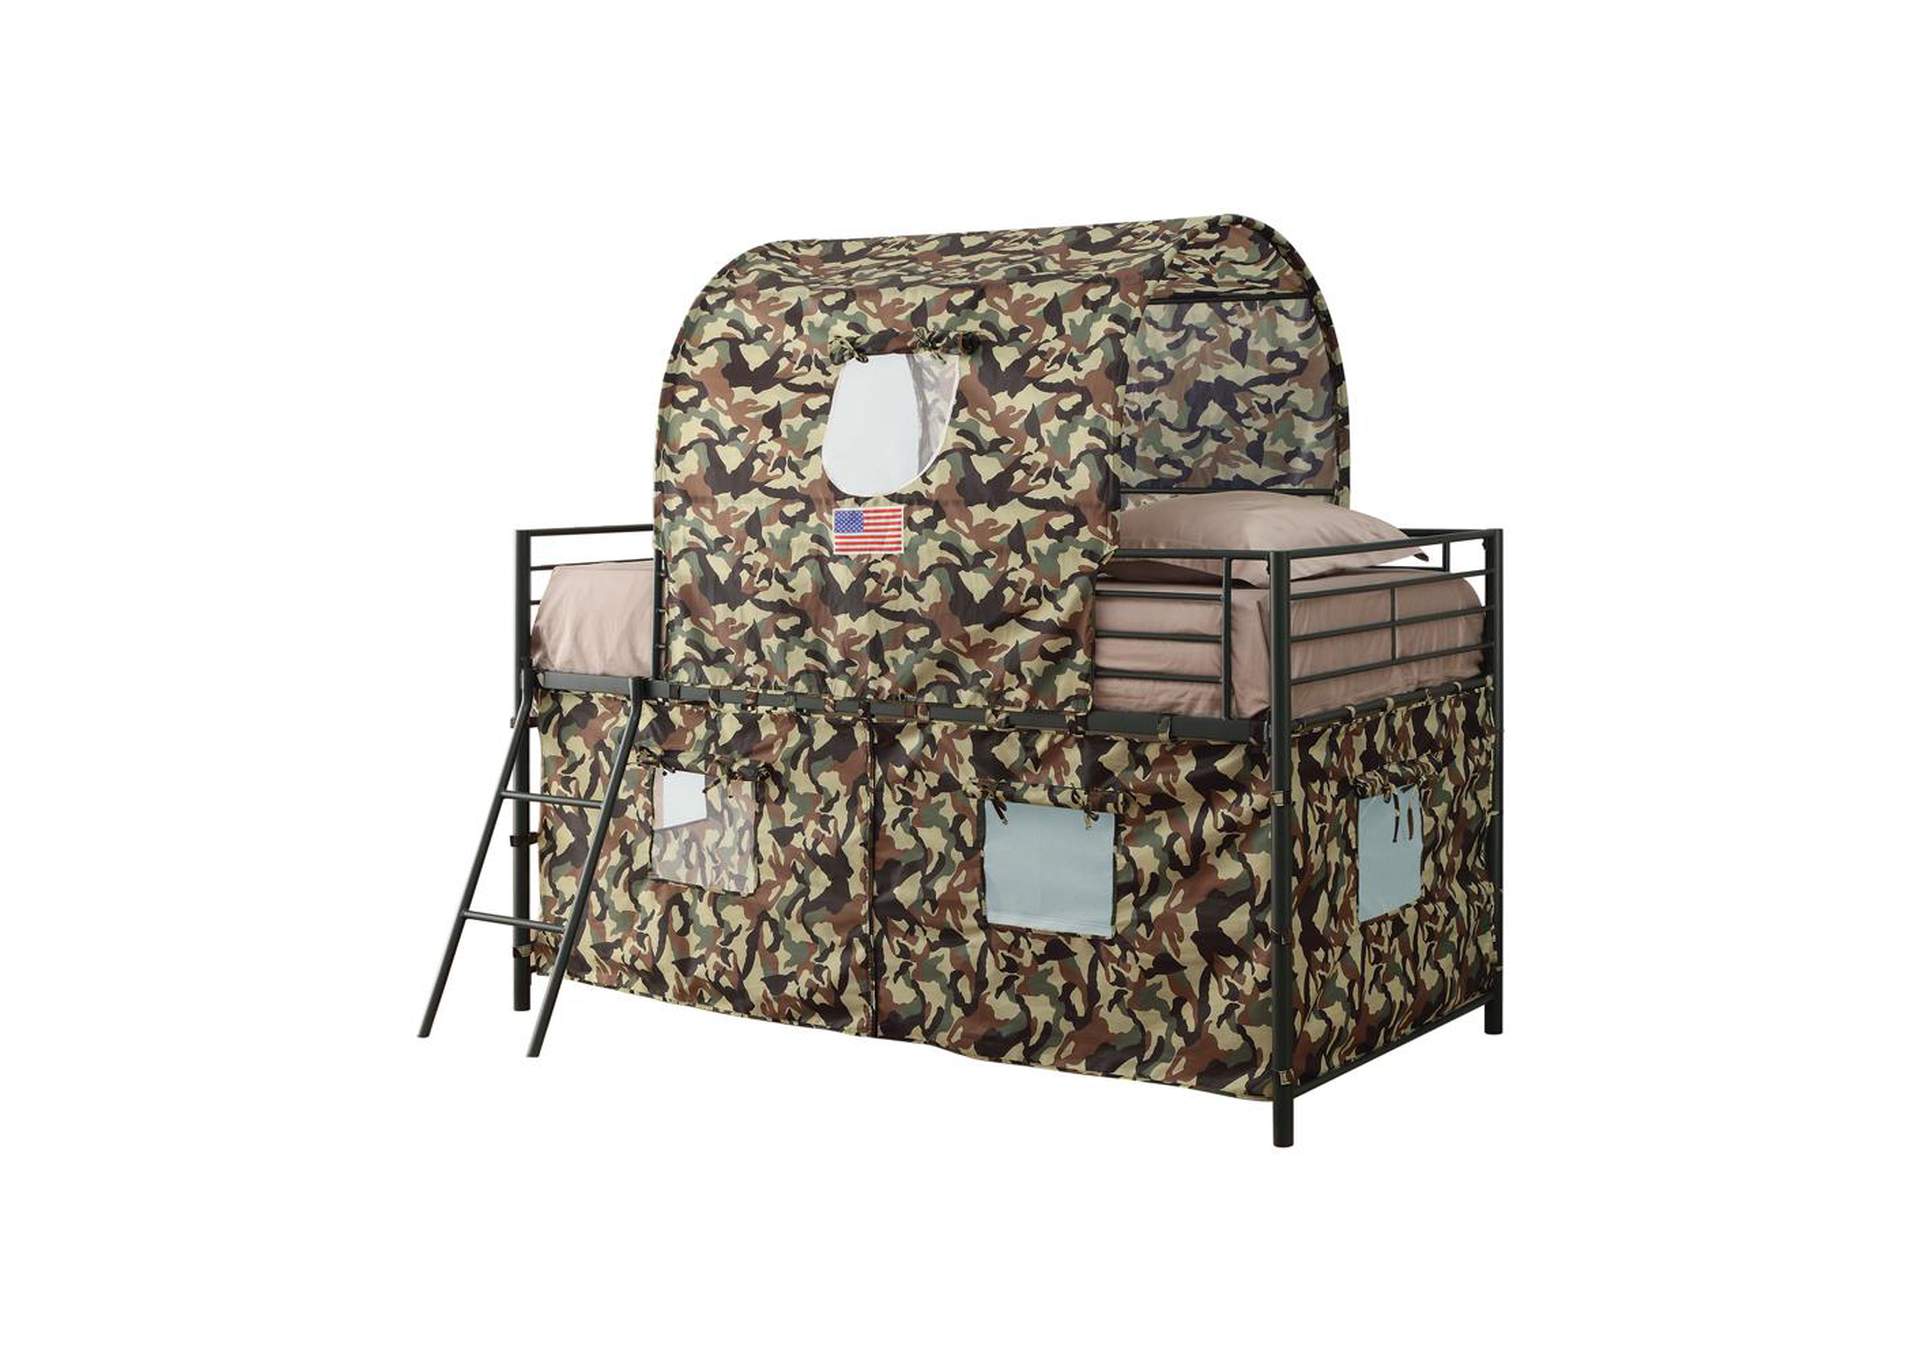 Armadillo Camouflage Tent Bunk Bed,Coaster Furniture